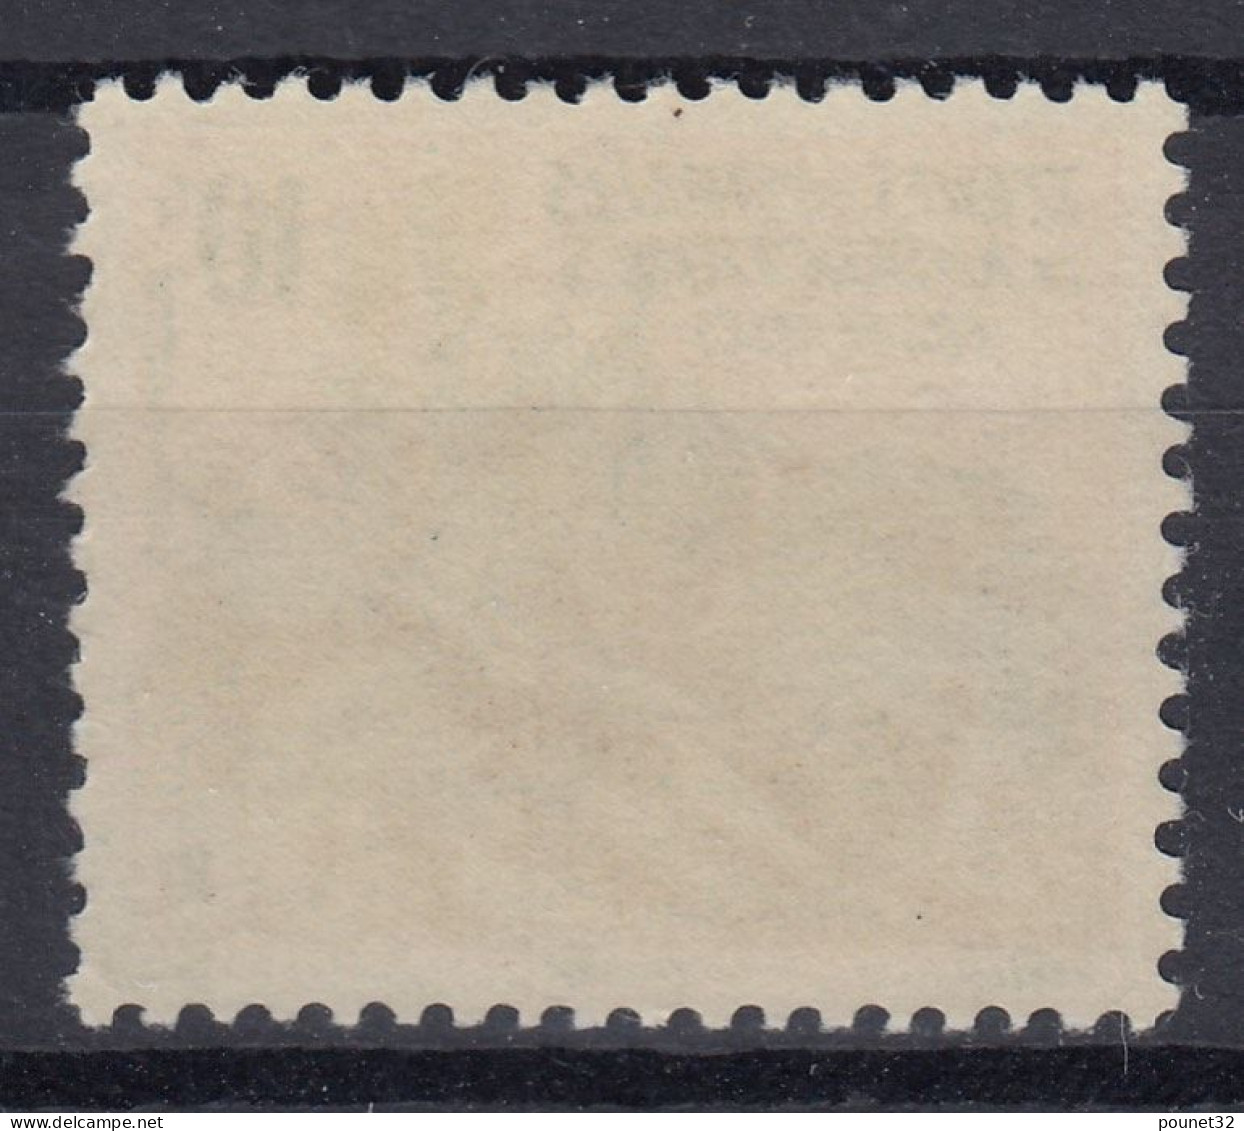 TIMBRE TAAF FLORE PRINGLEA CHOU DES KERGUELEN N° 11 NEUF ** GOMME SANS CHARNIERE - Unused Stamps